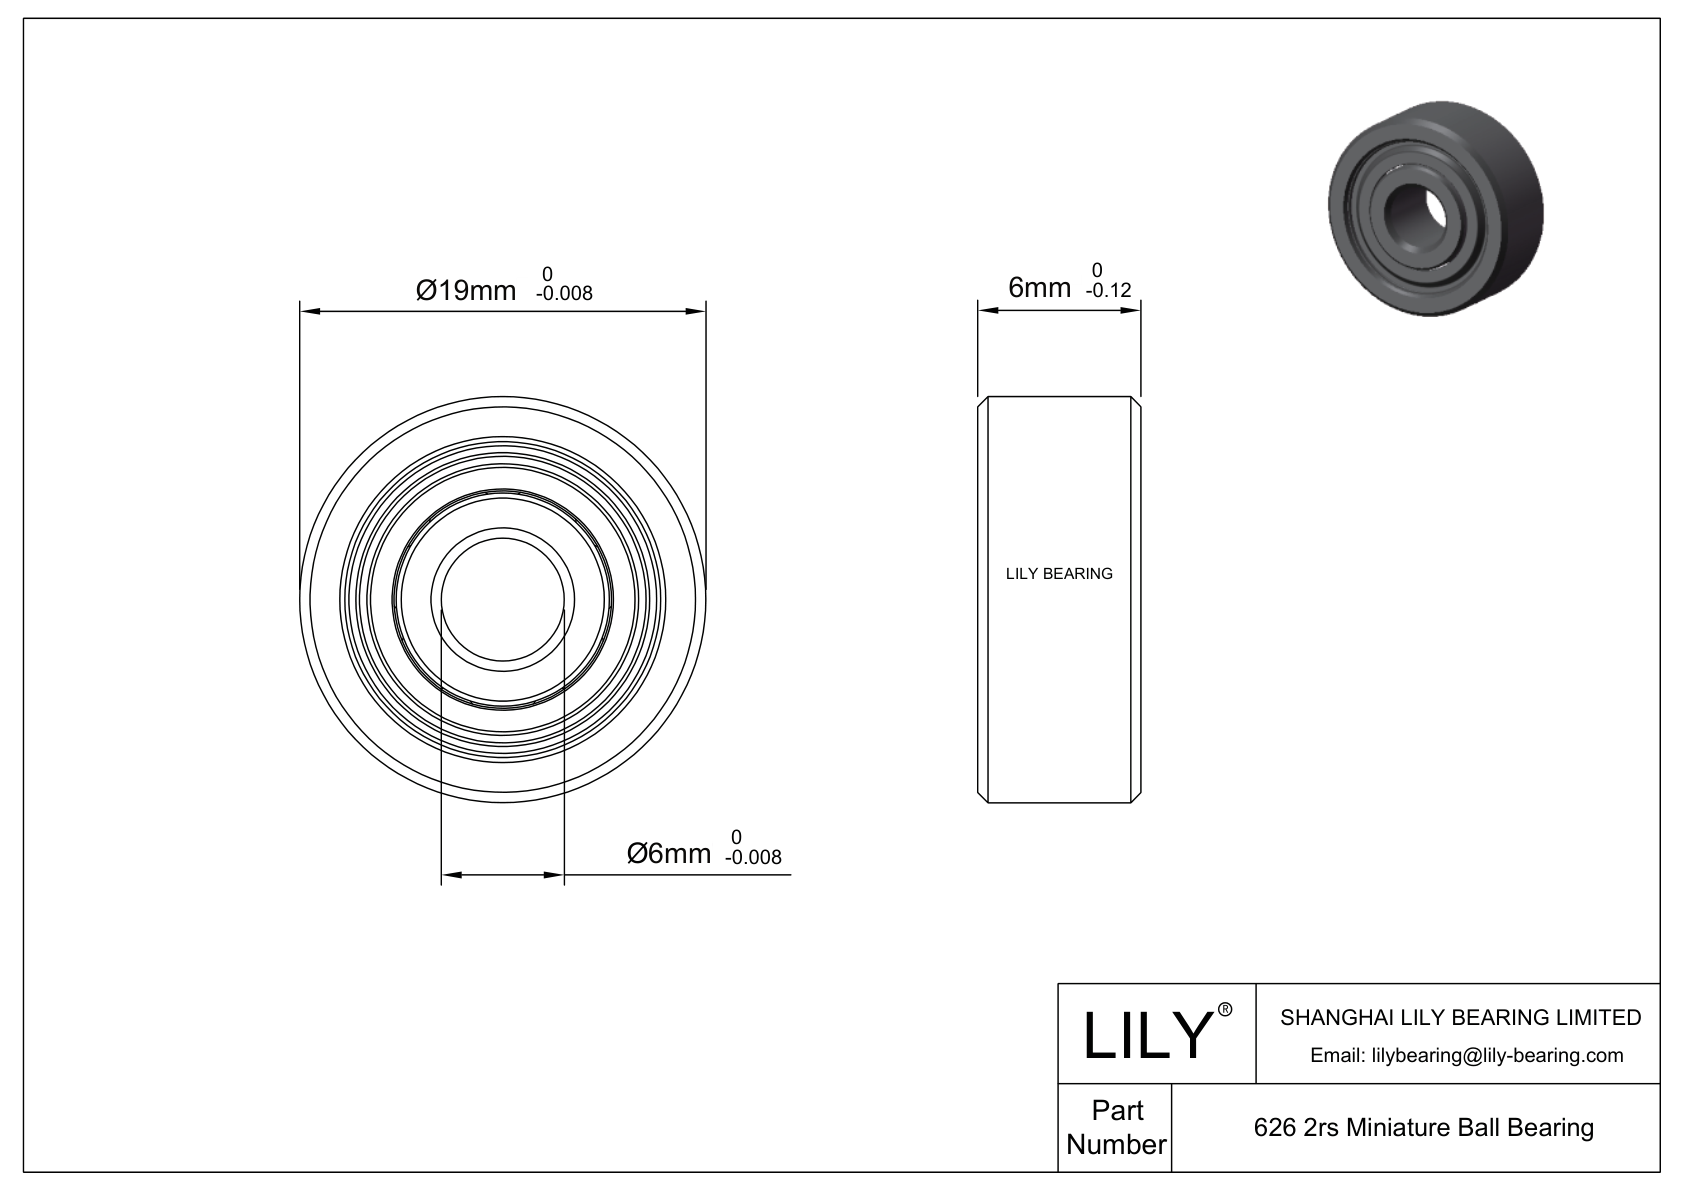 LILY-BST62630-50 Outsourcing POM bearings cad drawing